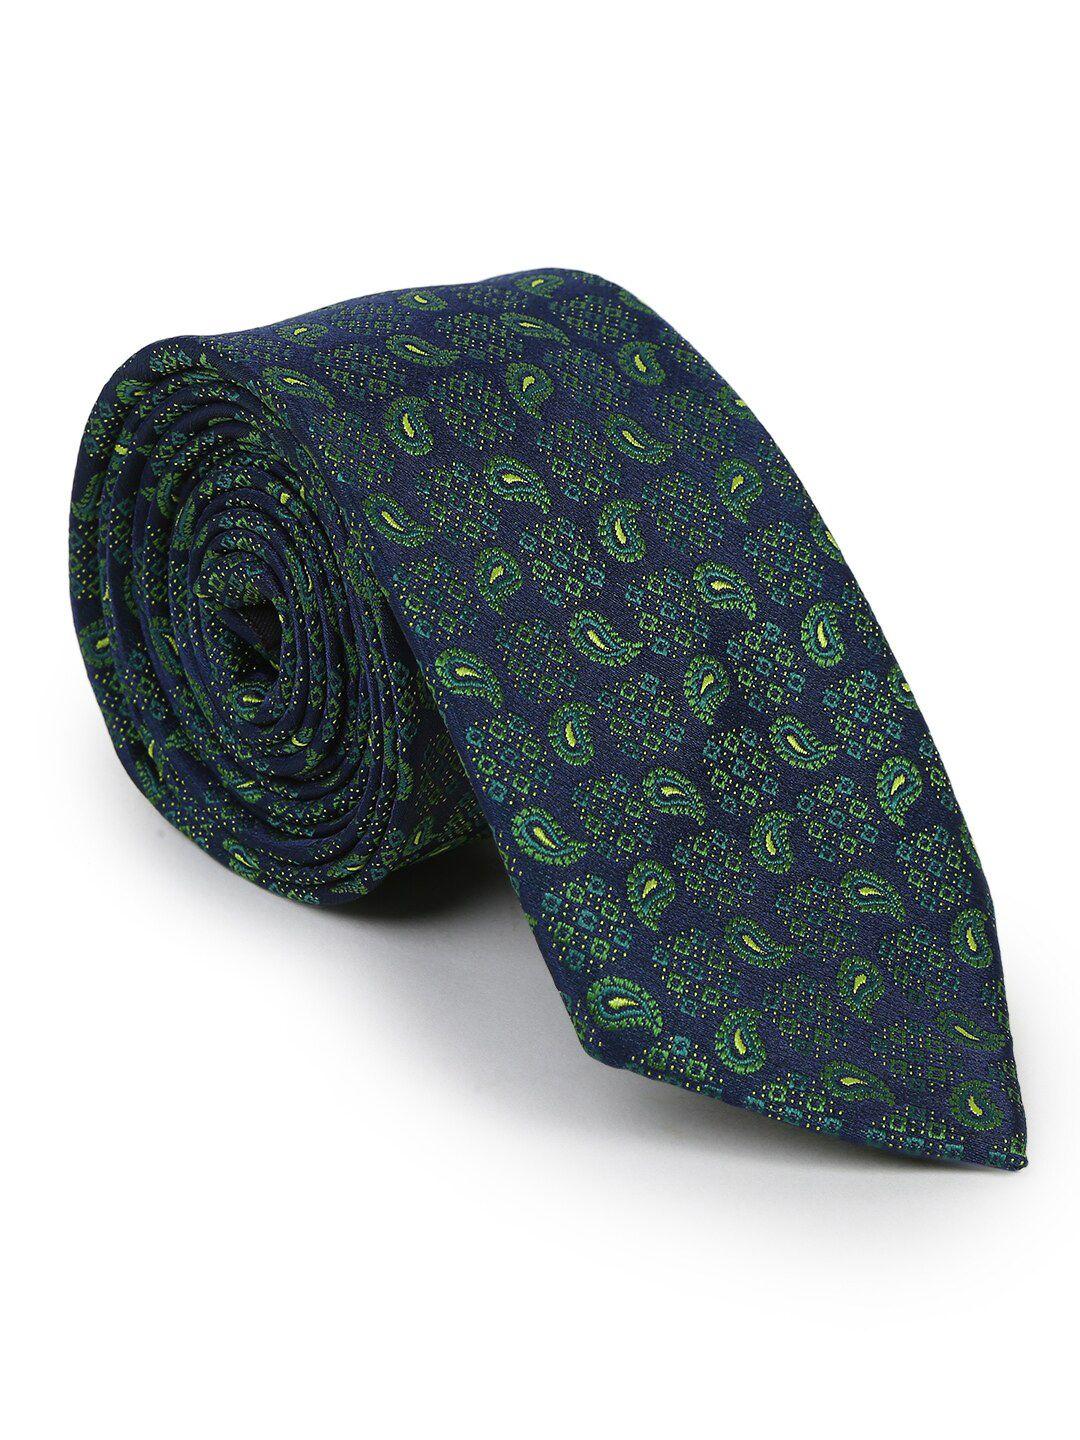 hashburys men woven design microfabric broad tie with matching pocket square